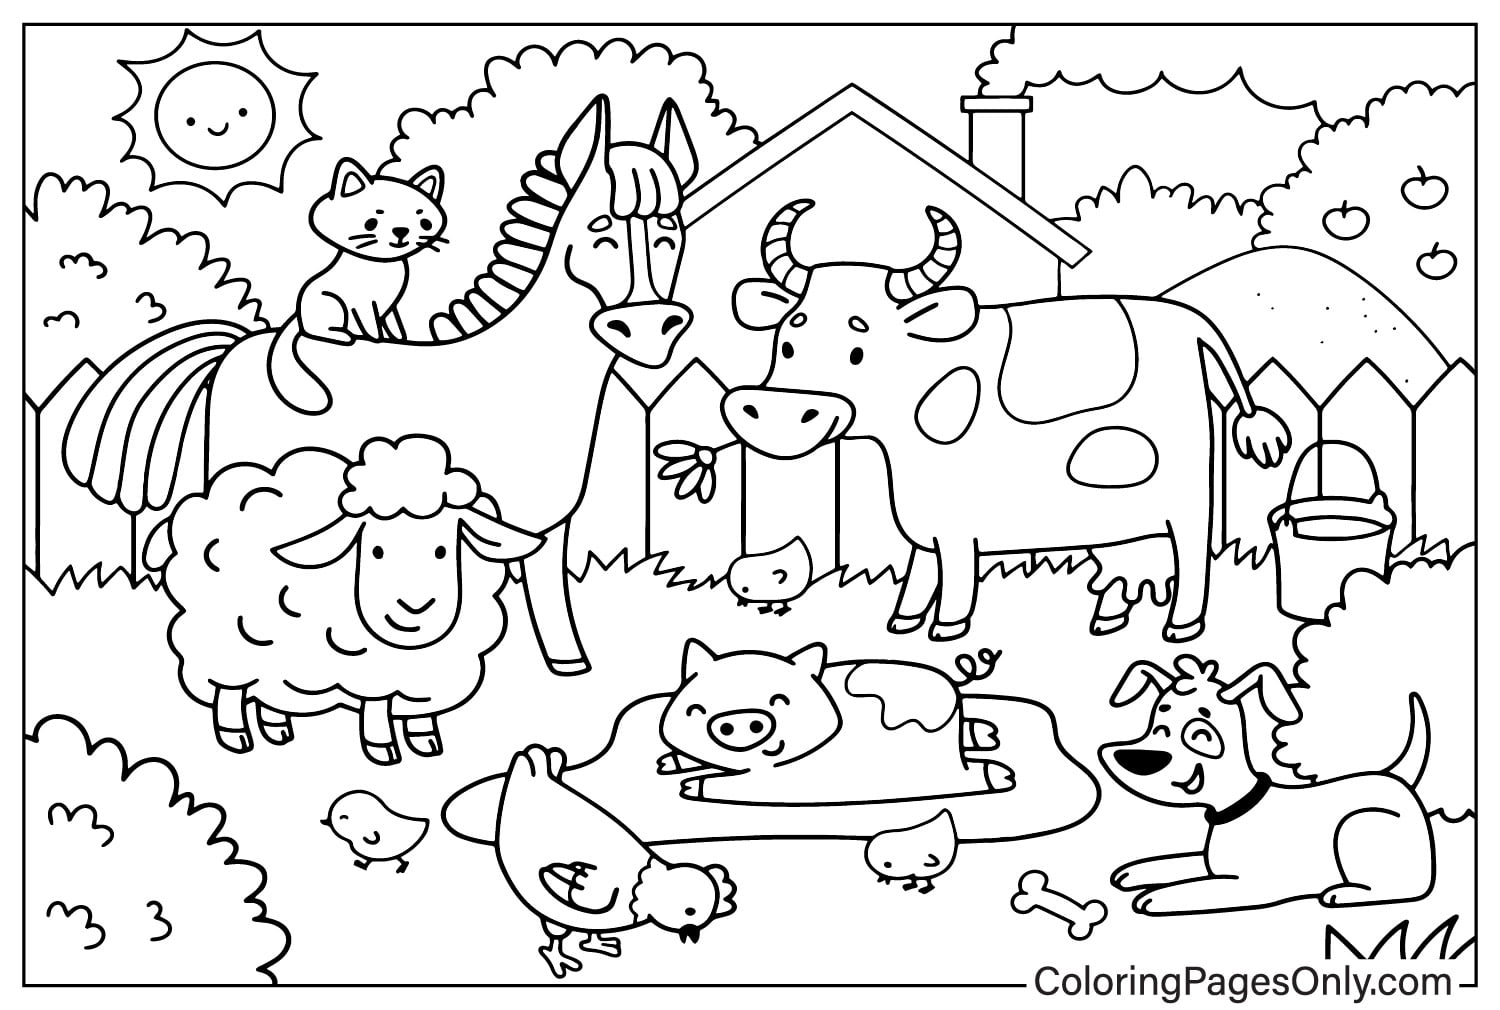 Animals Farm Doodle Farm - Free Printable Coloring Pages